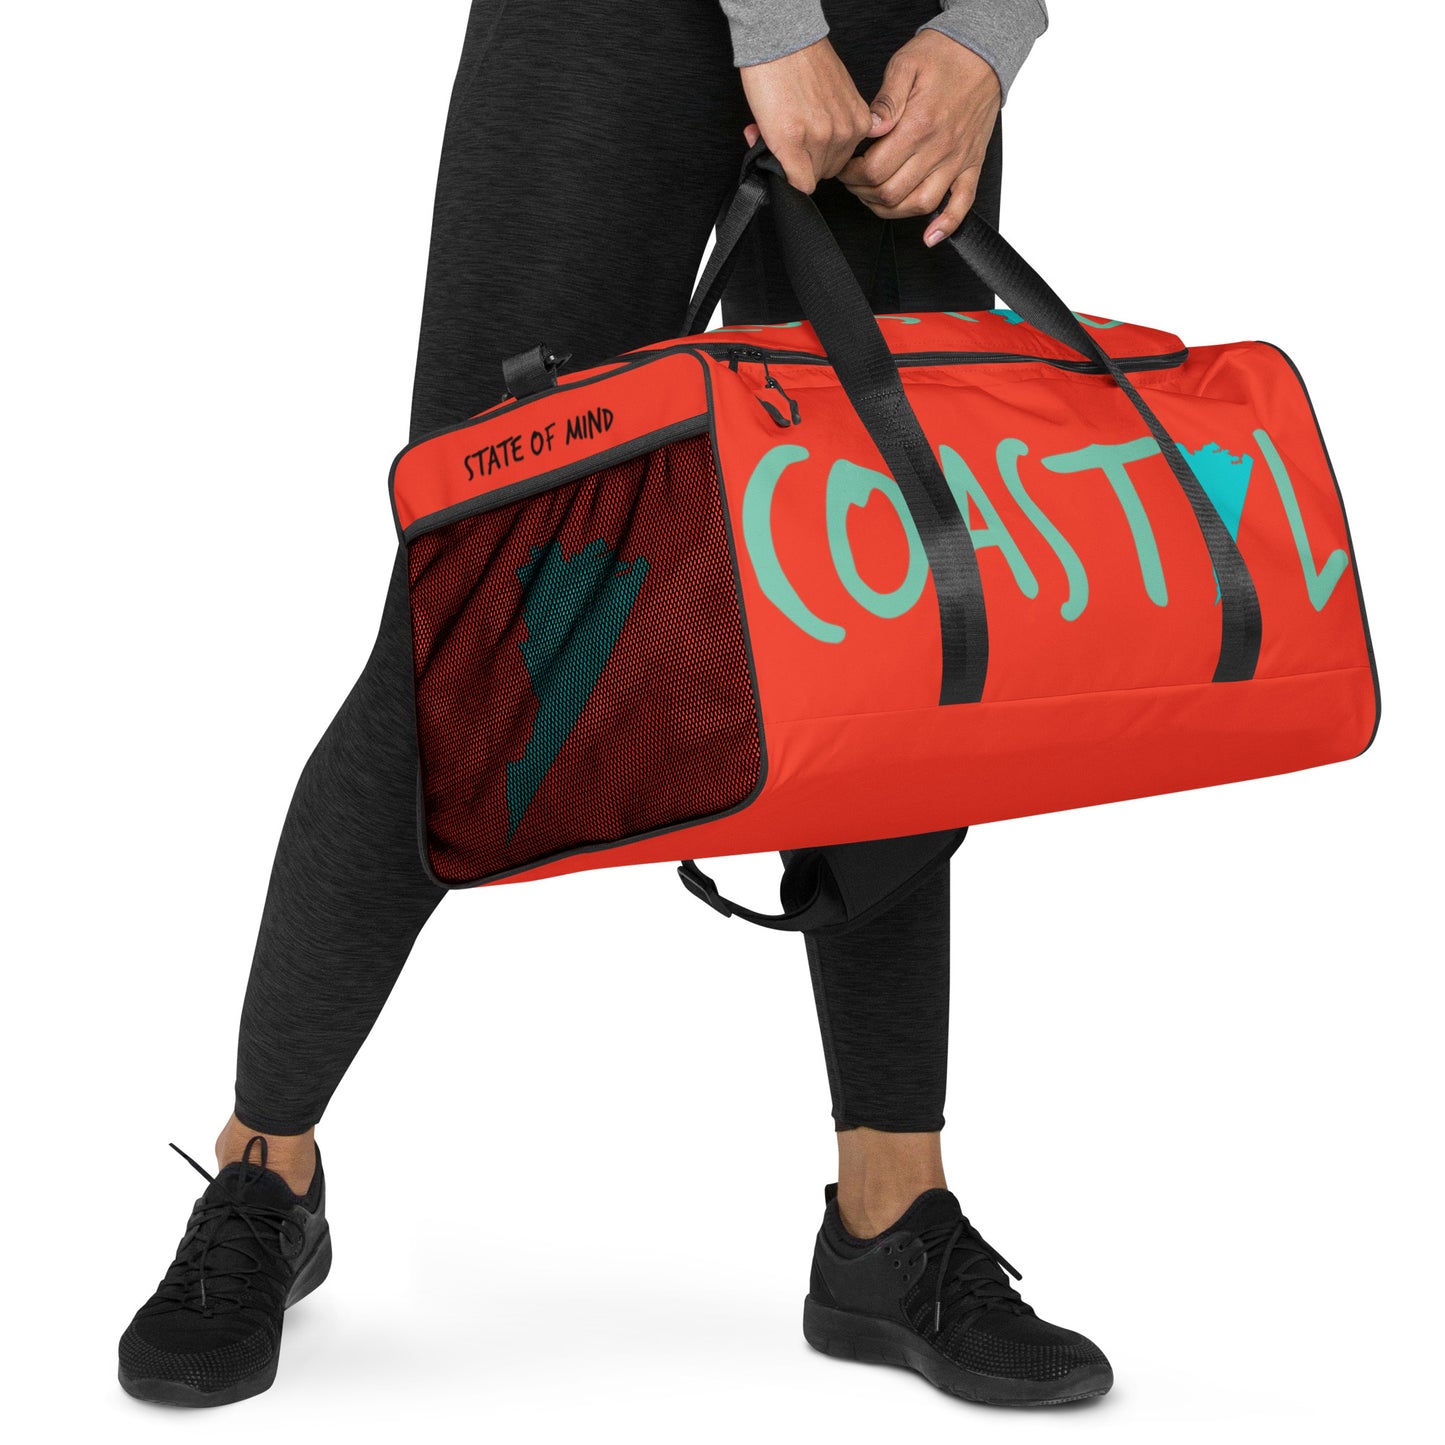 Coastal Virginia™ Carry Everything-in-Style Duffel